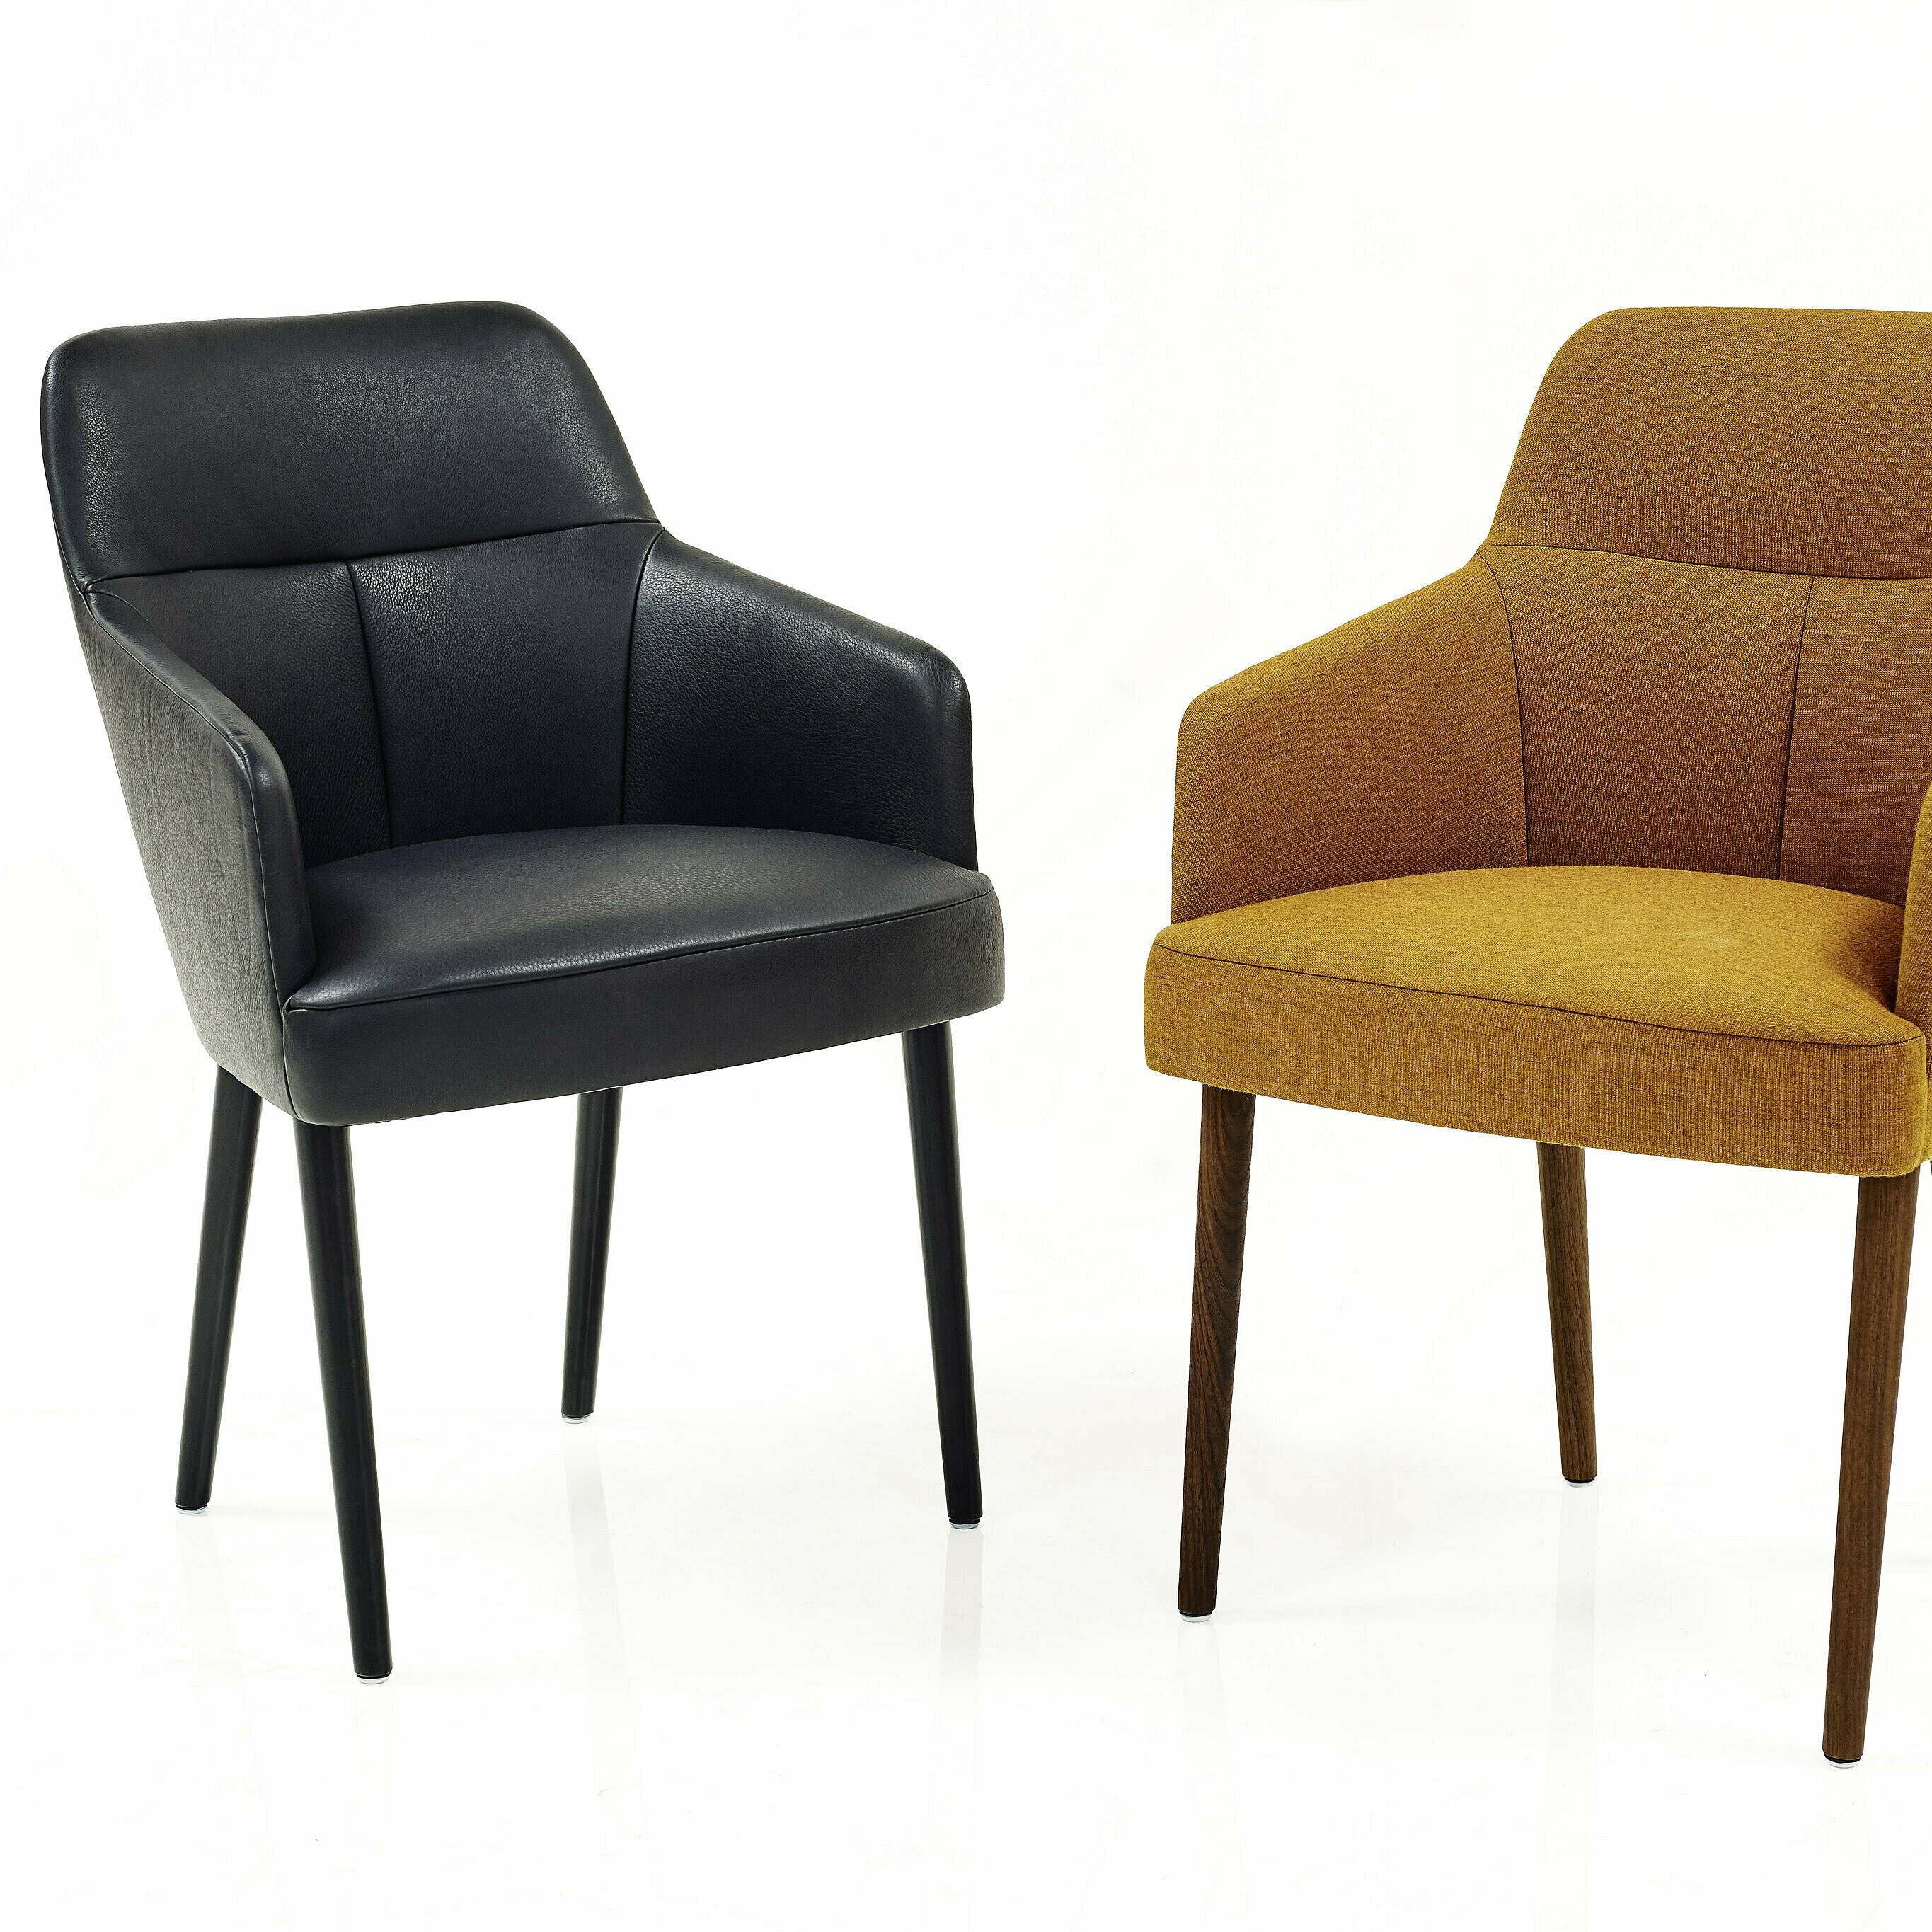 two mono chairs covered with black velvet, from the front and from the side